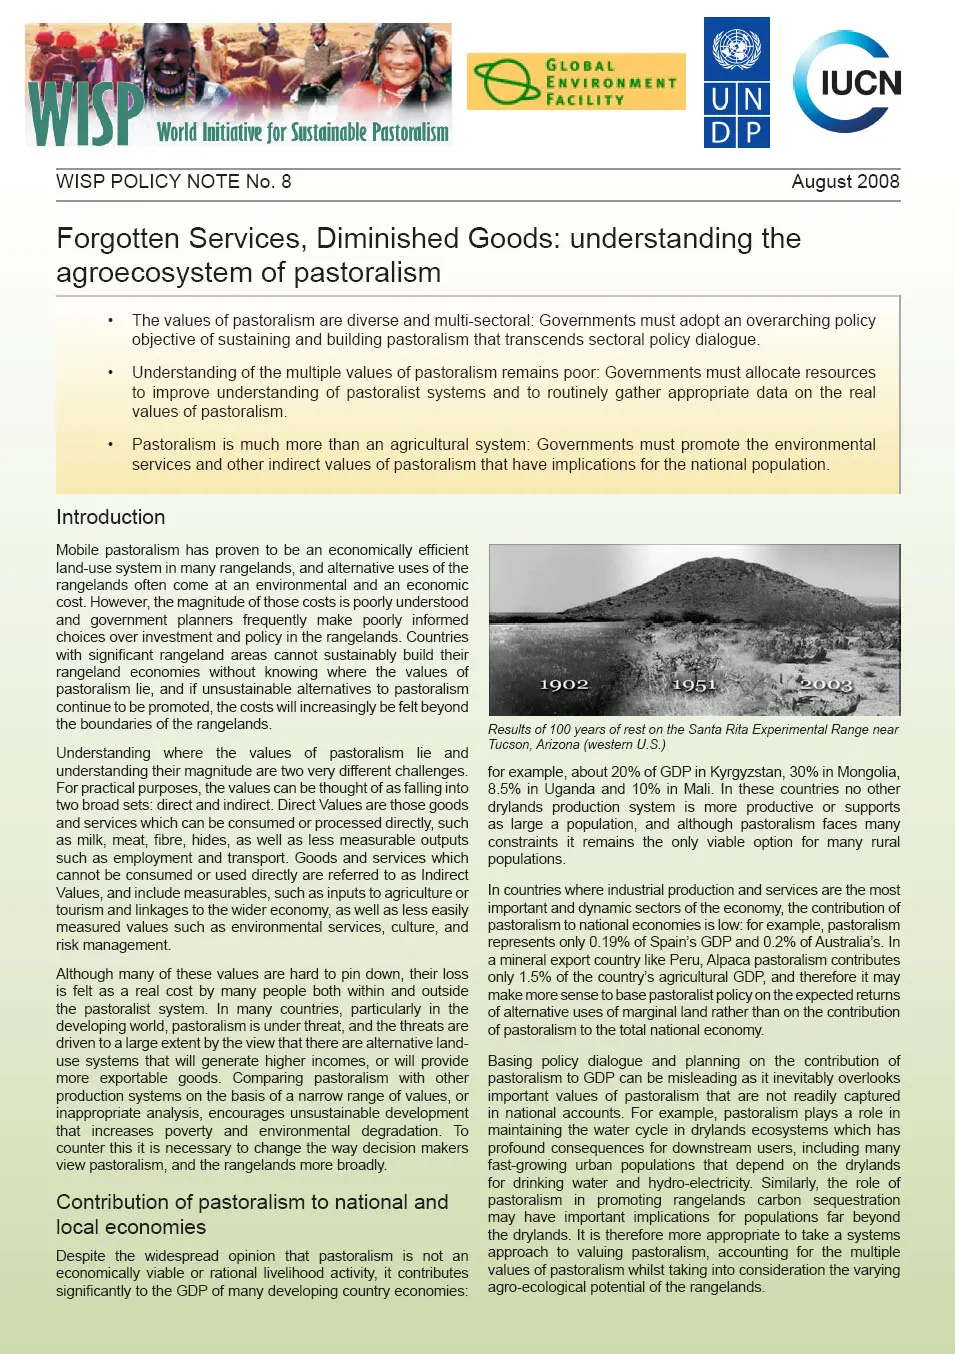 Forgotten services, diminished goods: understanding the agroecosystem of pastoralism